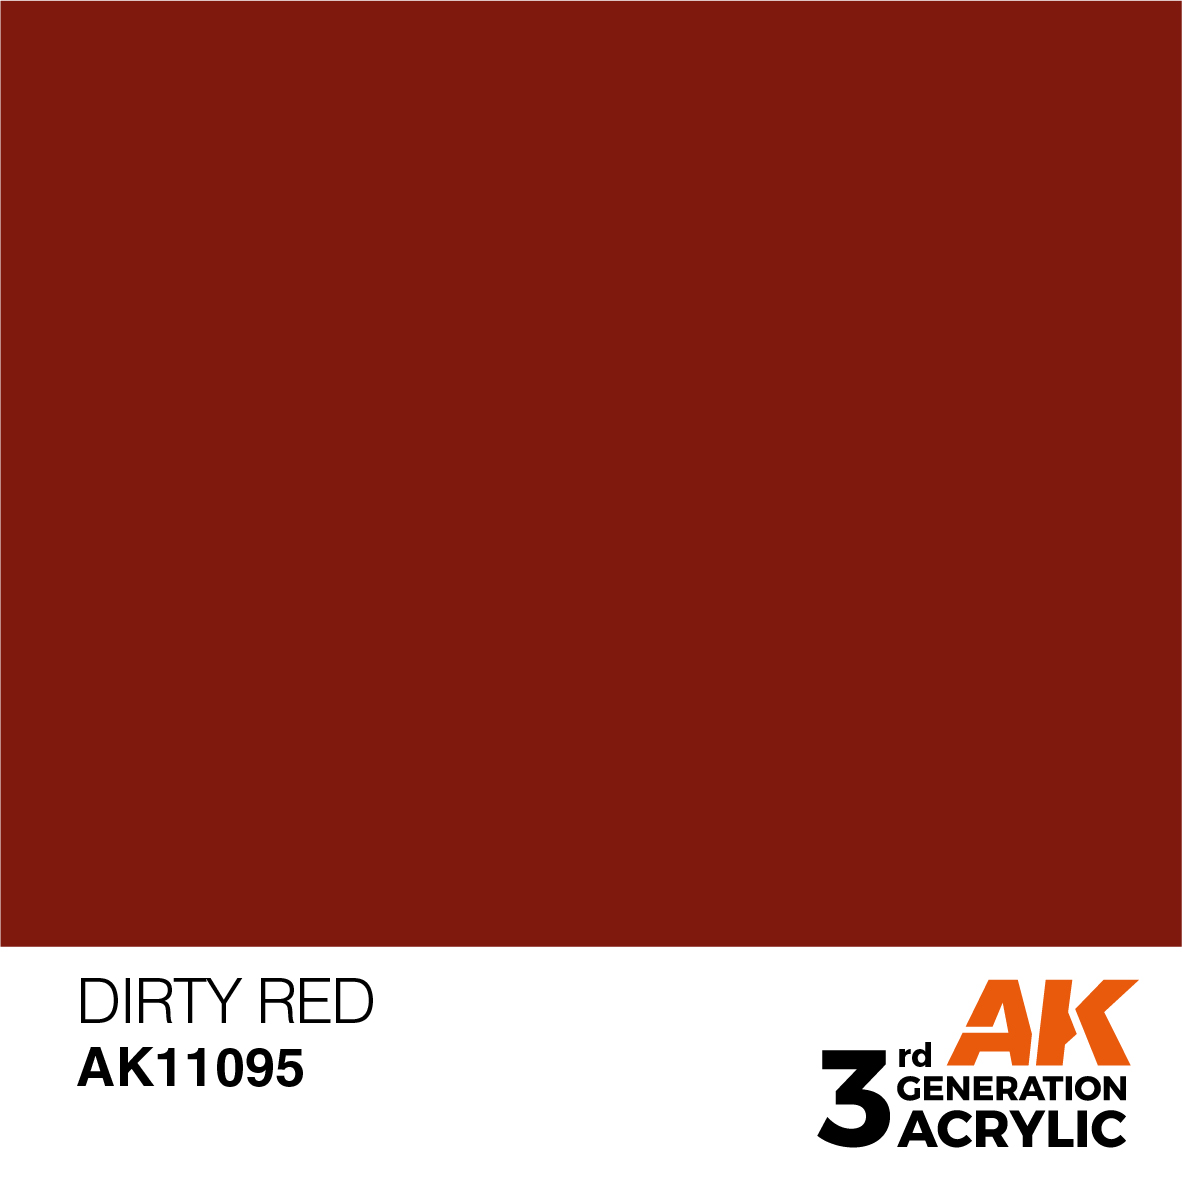 DIRTY RED – STANDARD